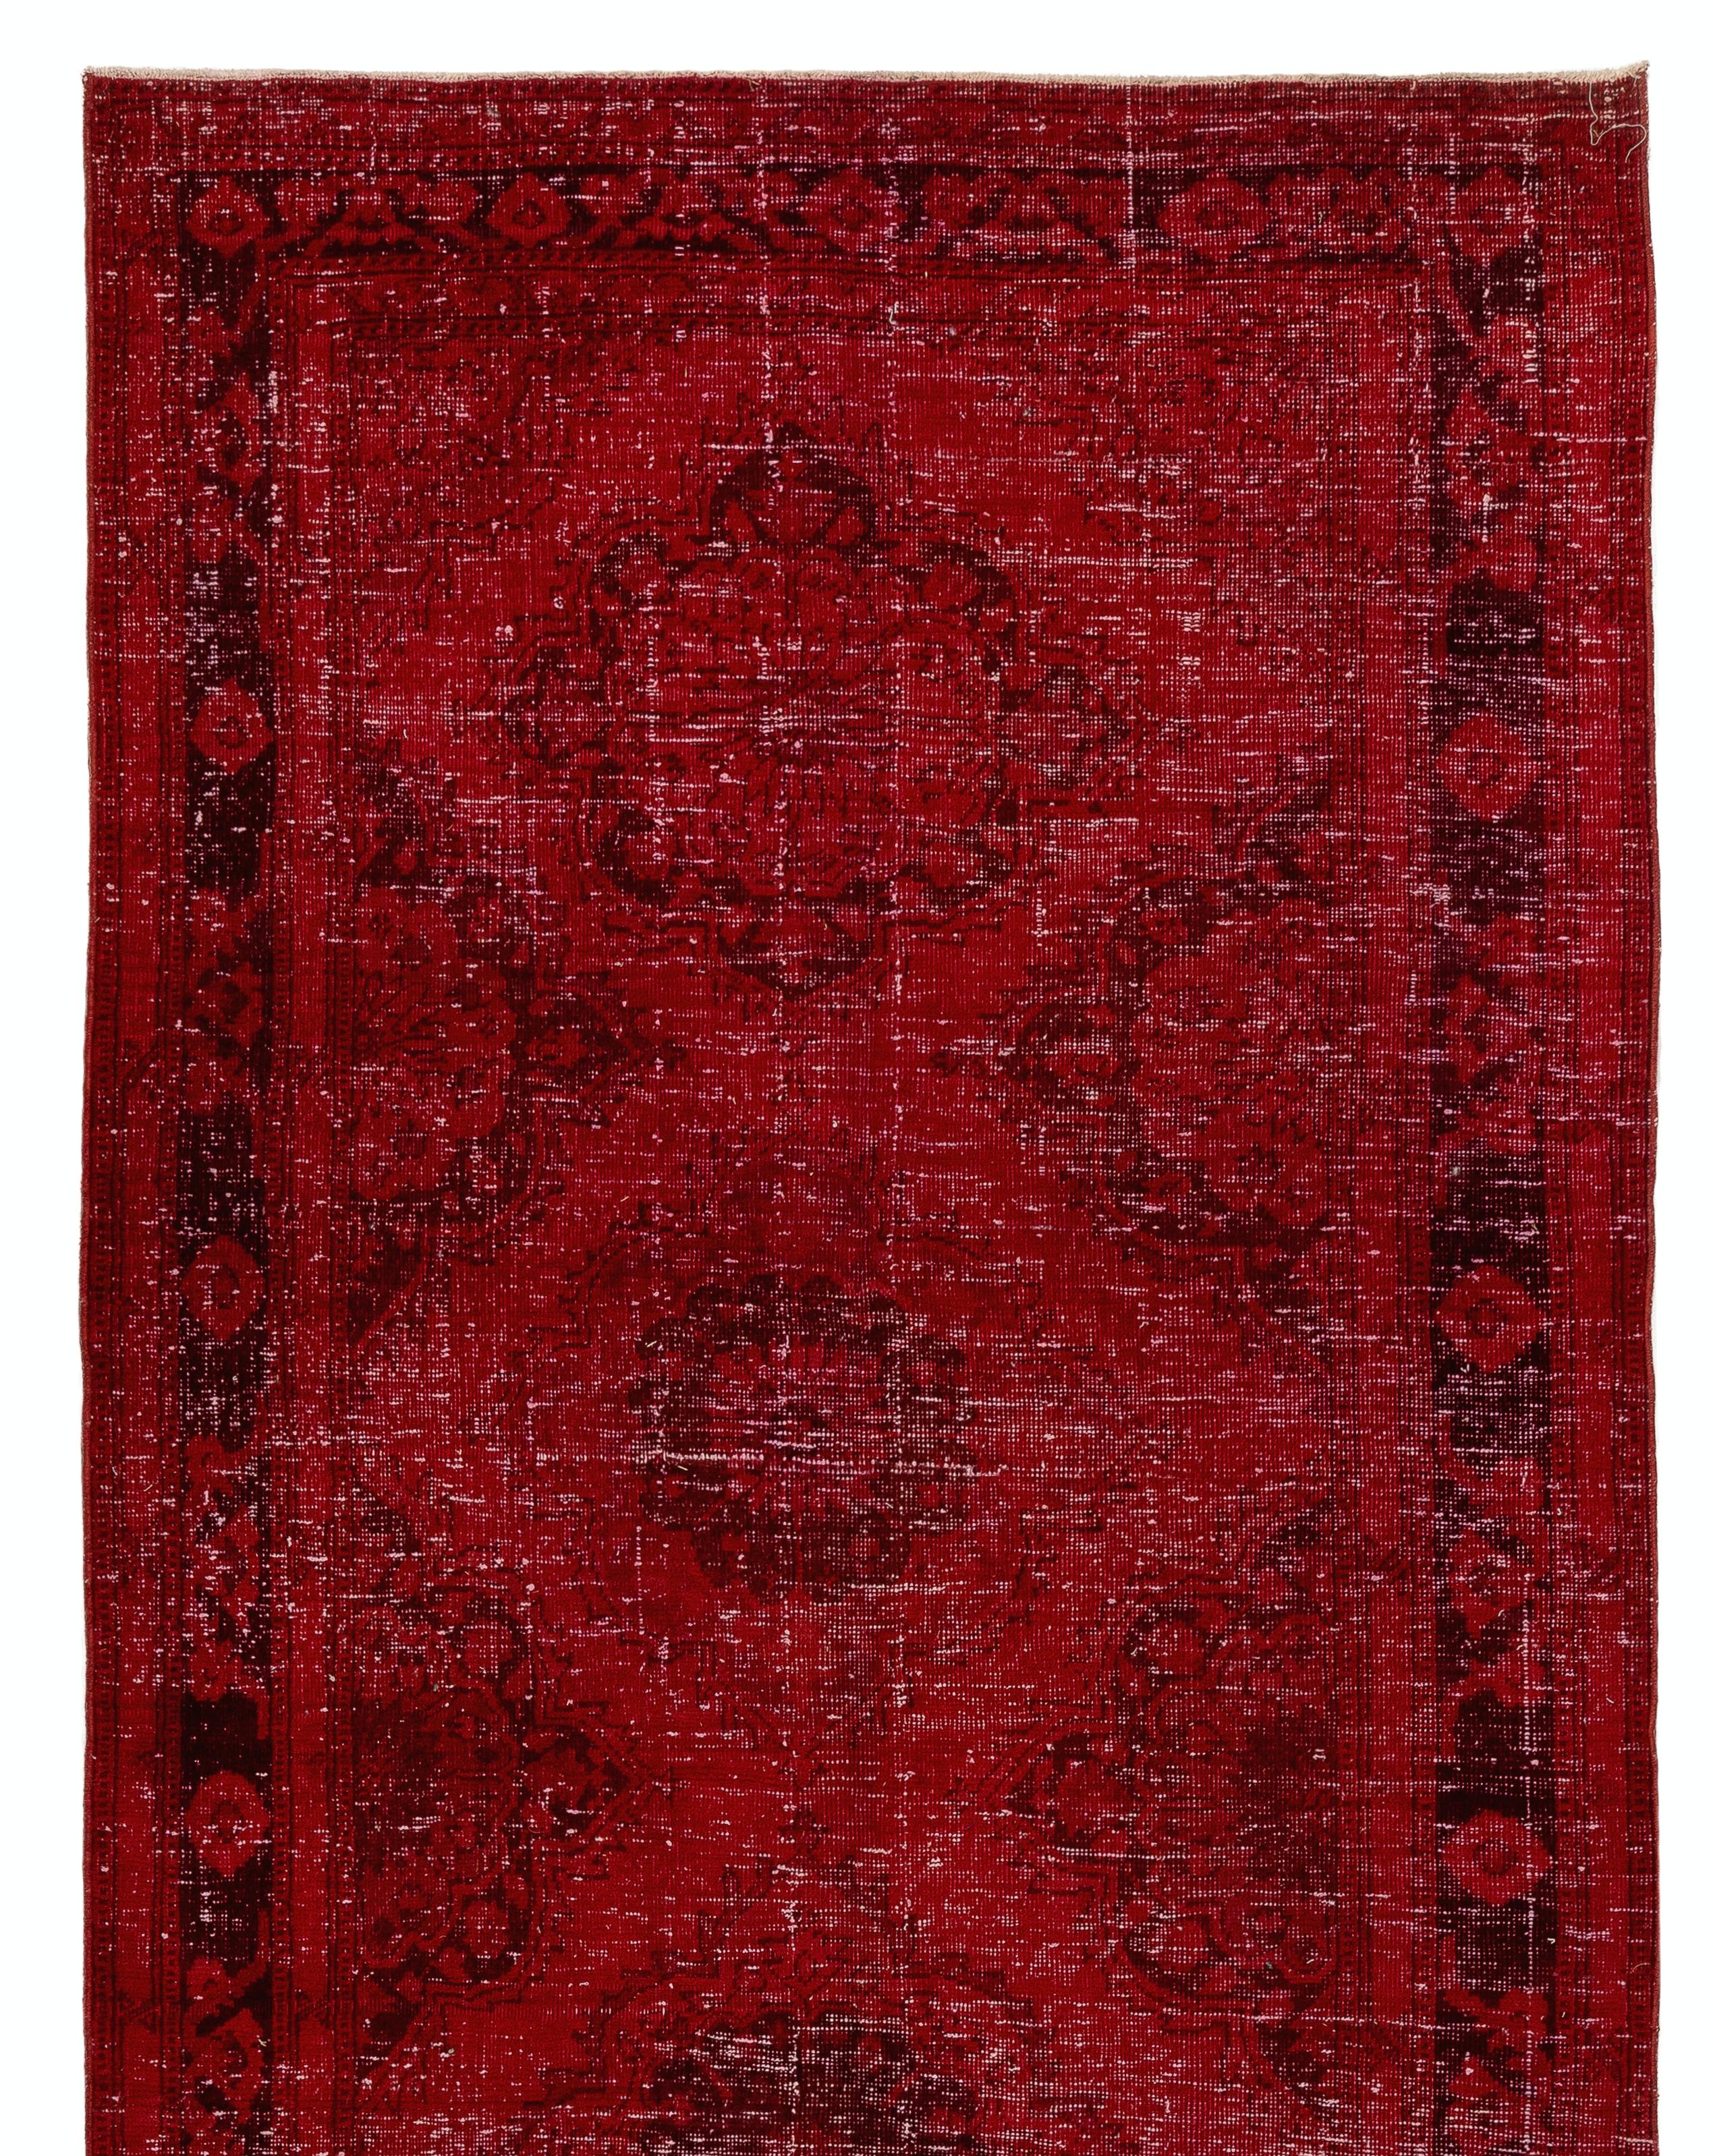 A vintage, hand-knotted and distressed Turkish runner rug made of wool, over-dyed in red color, featuring a design of linked medallions. Great for contemporary interiors. Size: 4.7 x 12.4 ft.

It is finely hand-knotted and has low wool pile on